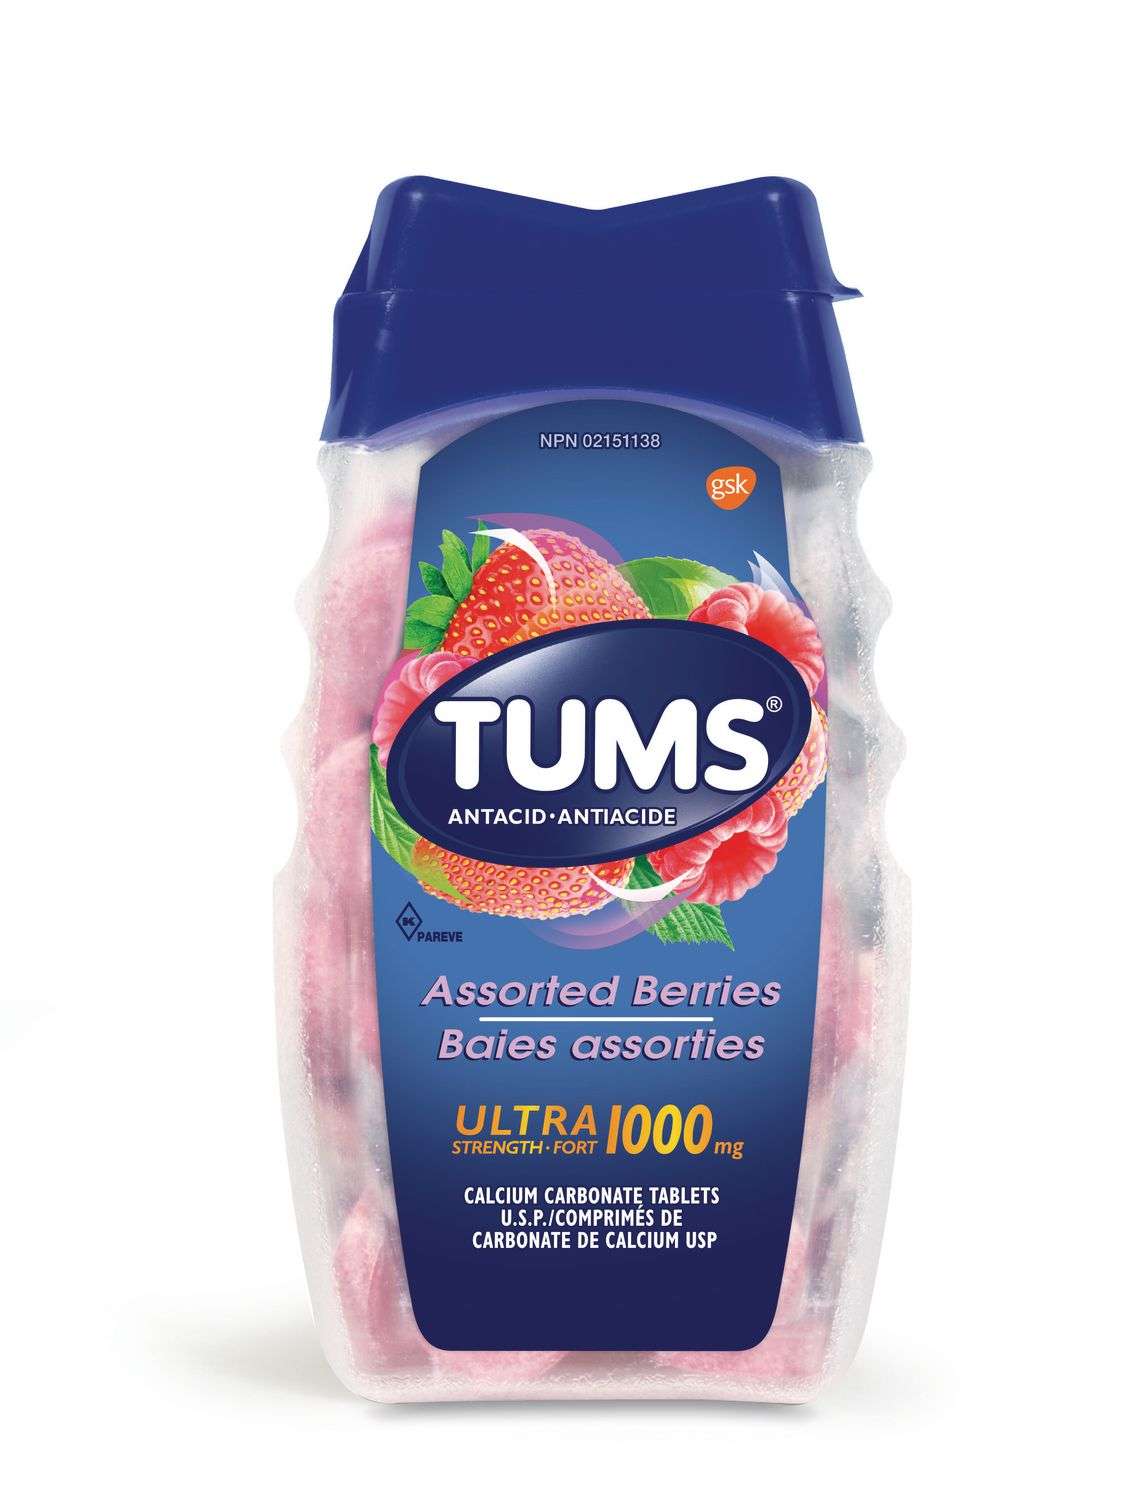 Tums Ultra Strength 1000mg Antacid for Heartburn Relief